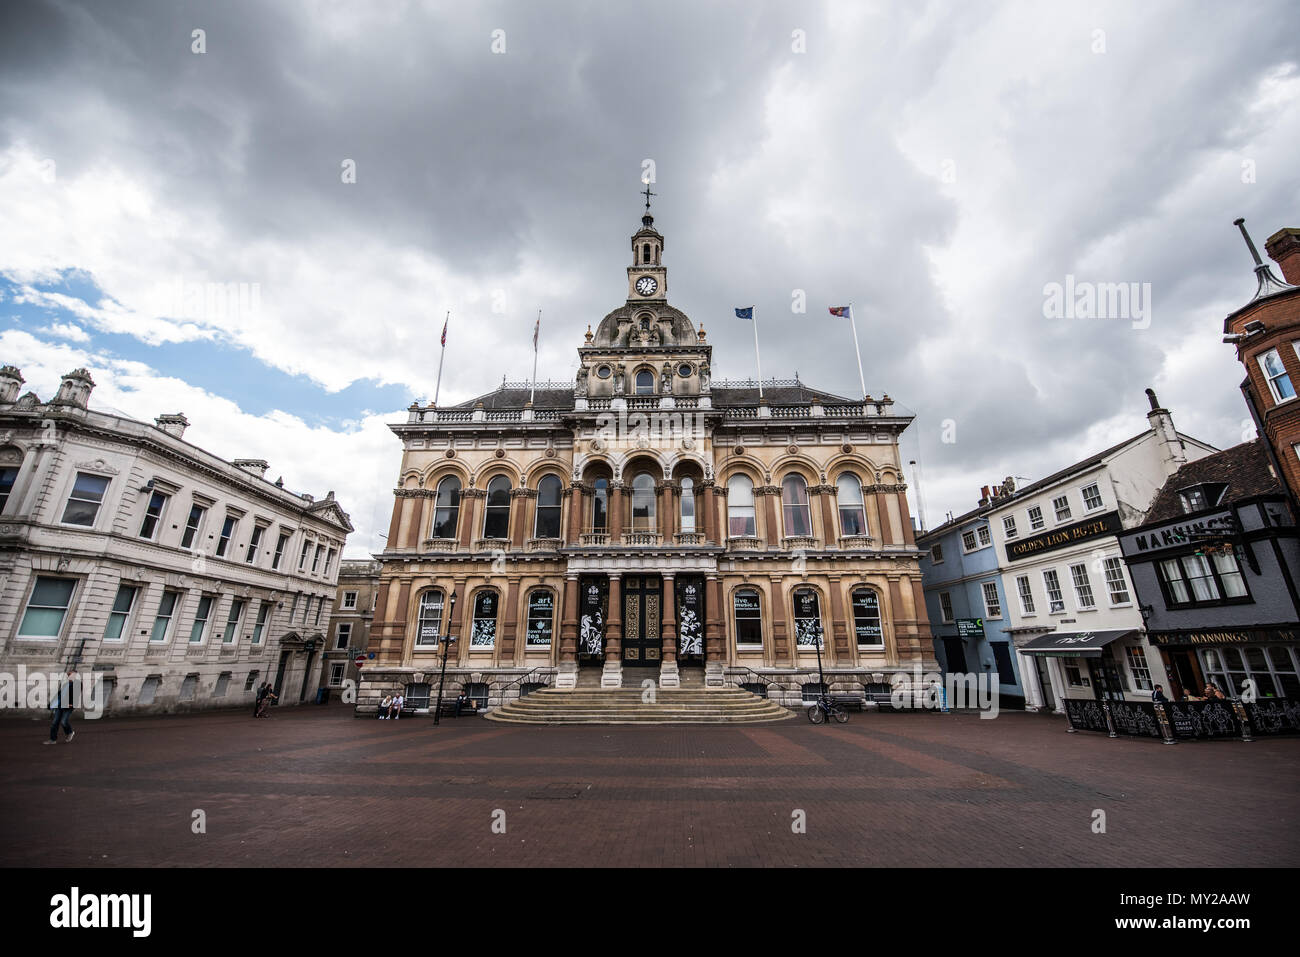 Ipswich Town Hall. Suffolk, UK Banque D'Images